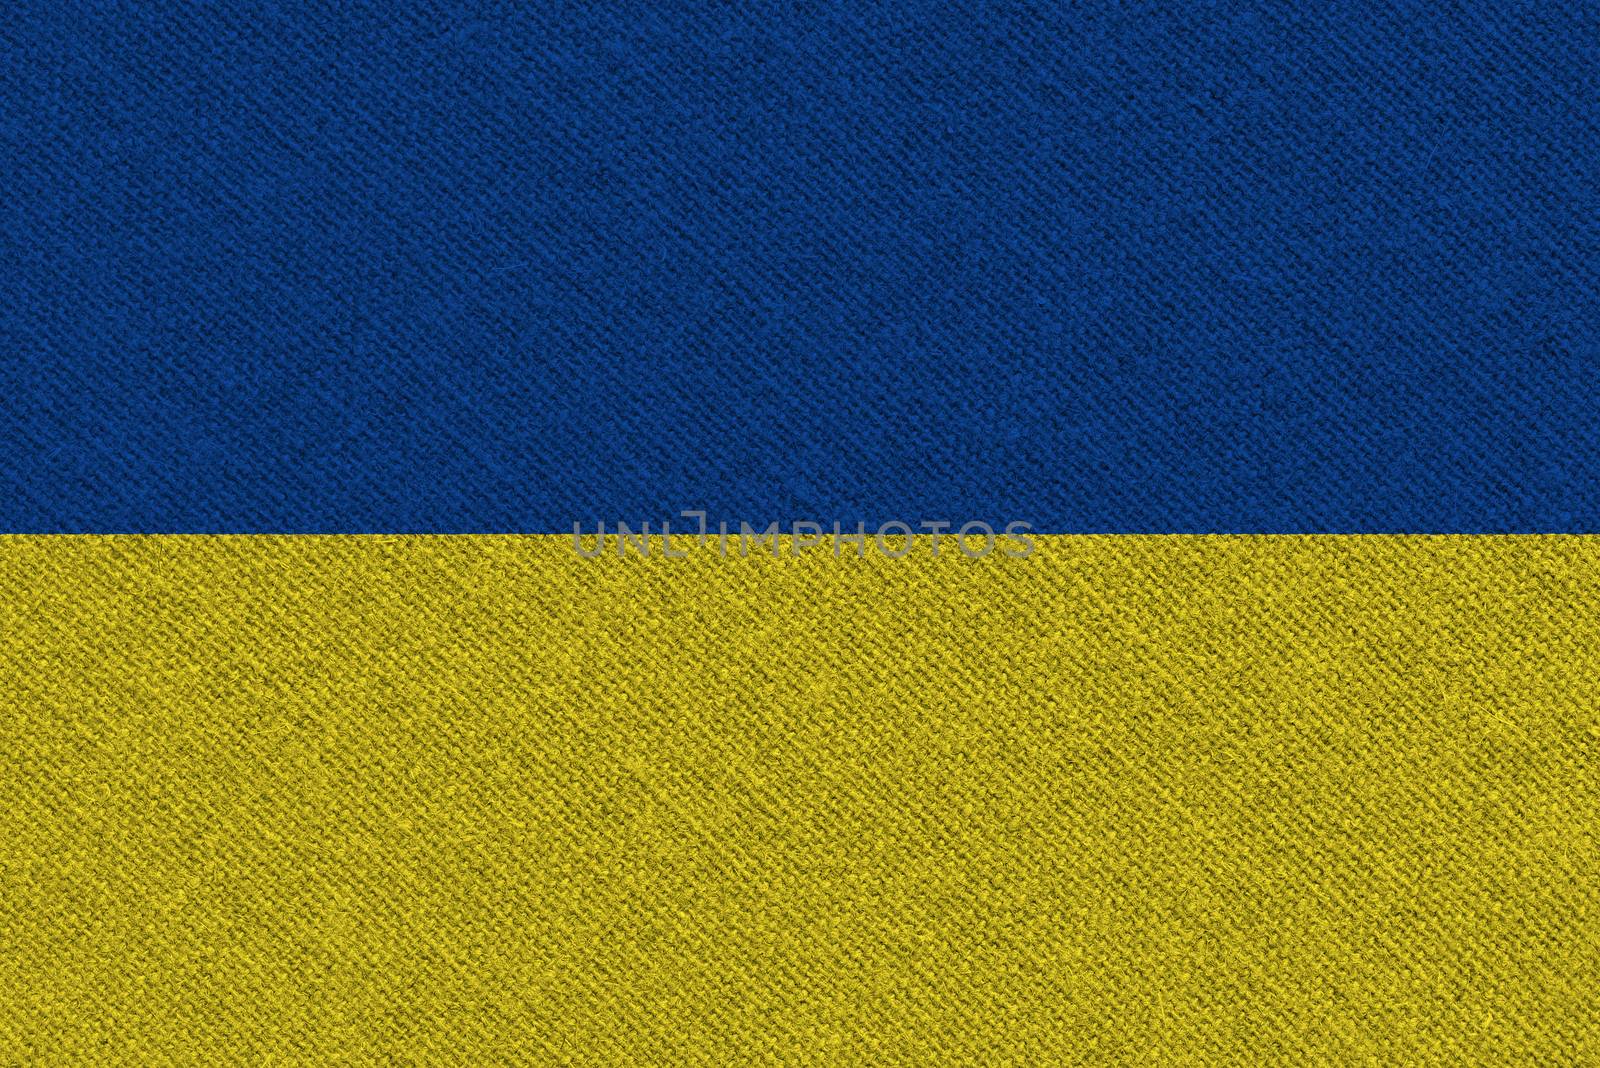 Ukraine fabric flag by Visual-Content